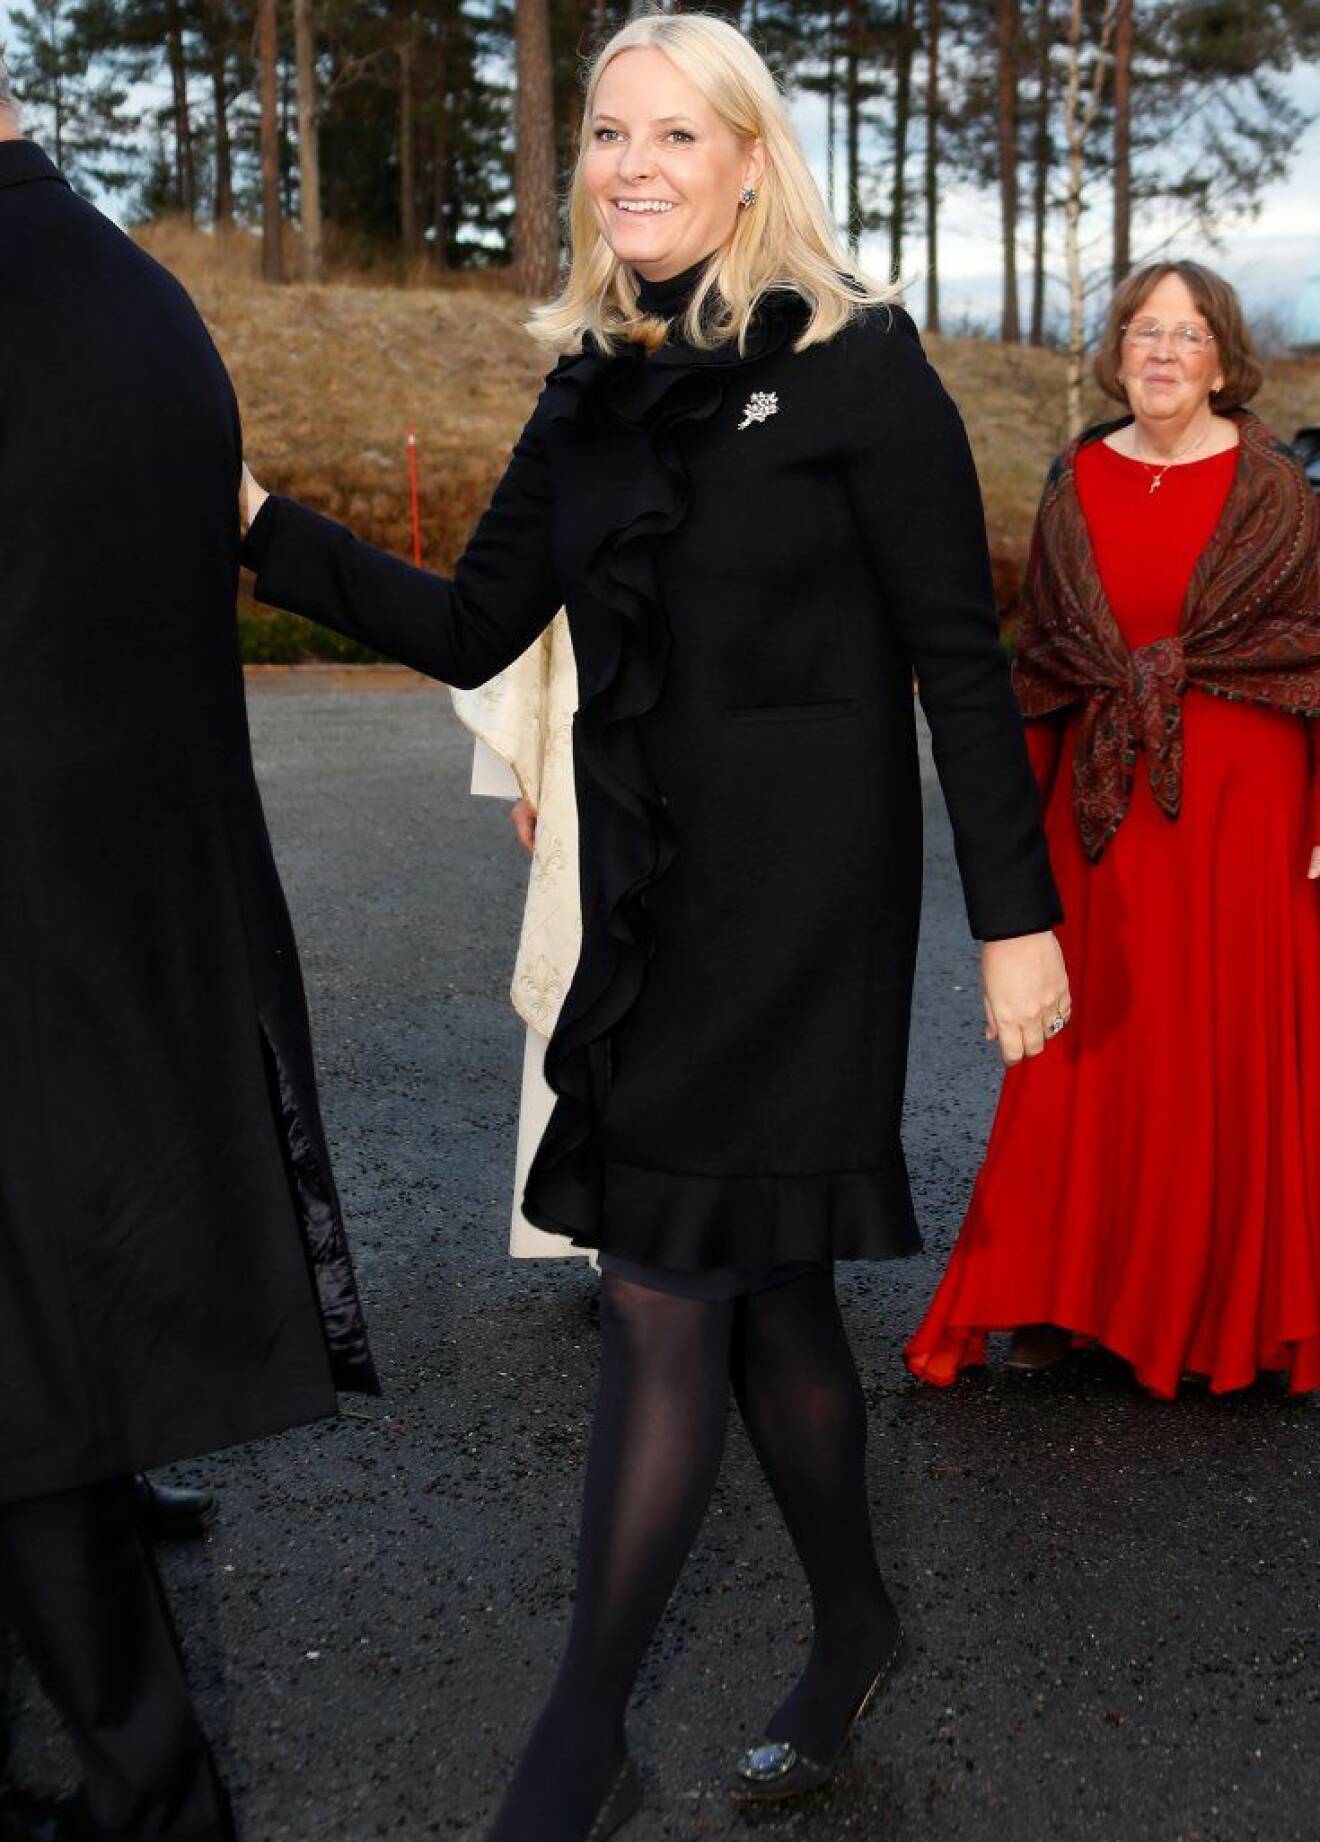 The Norwegian Royal Family attends Christmas Service in Holmenkollen Chape